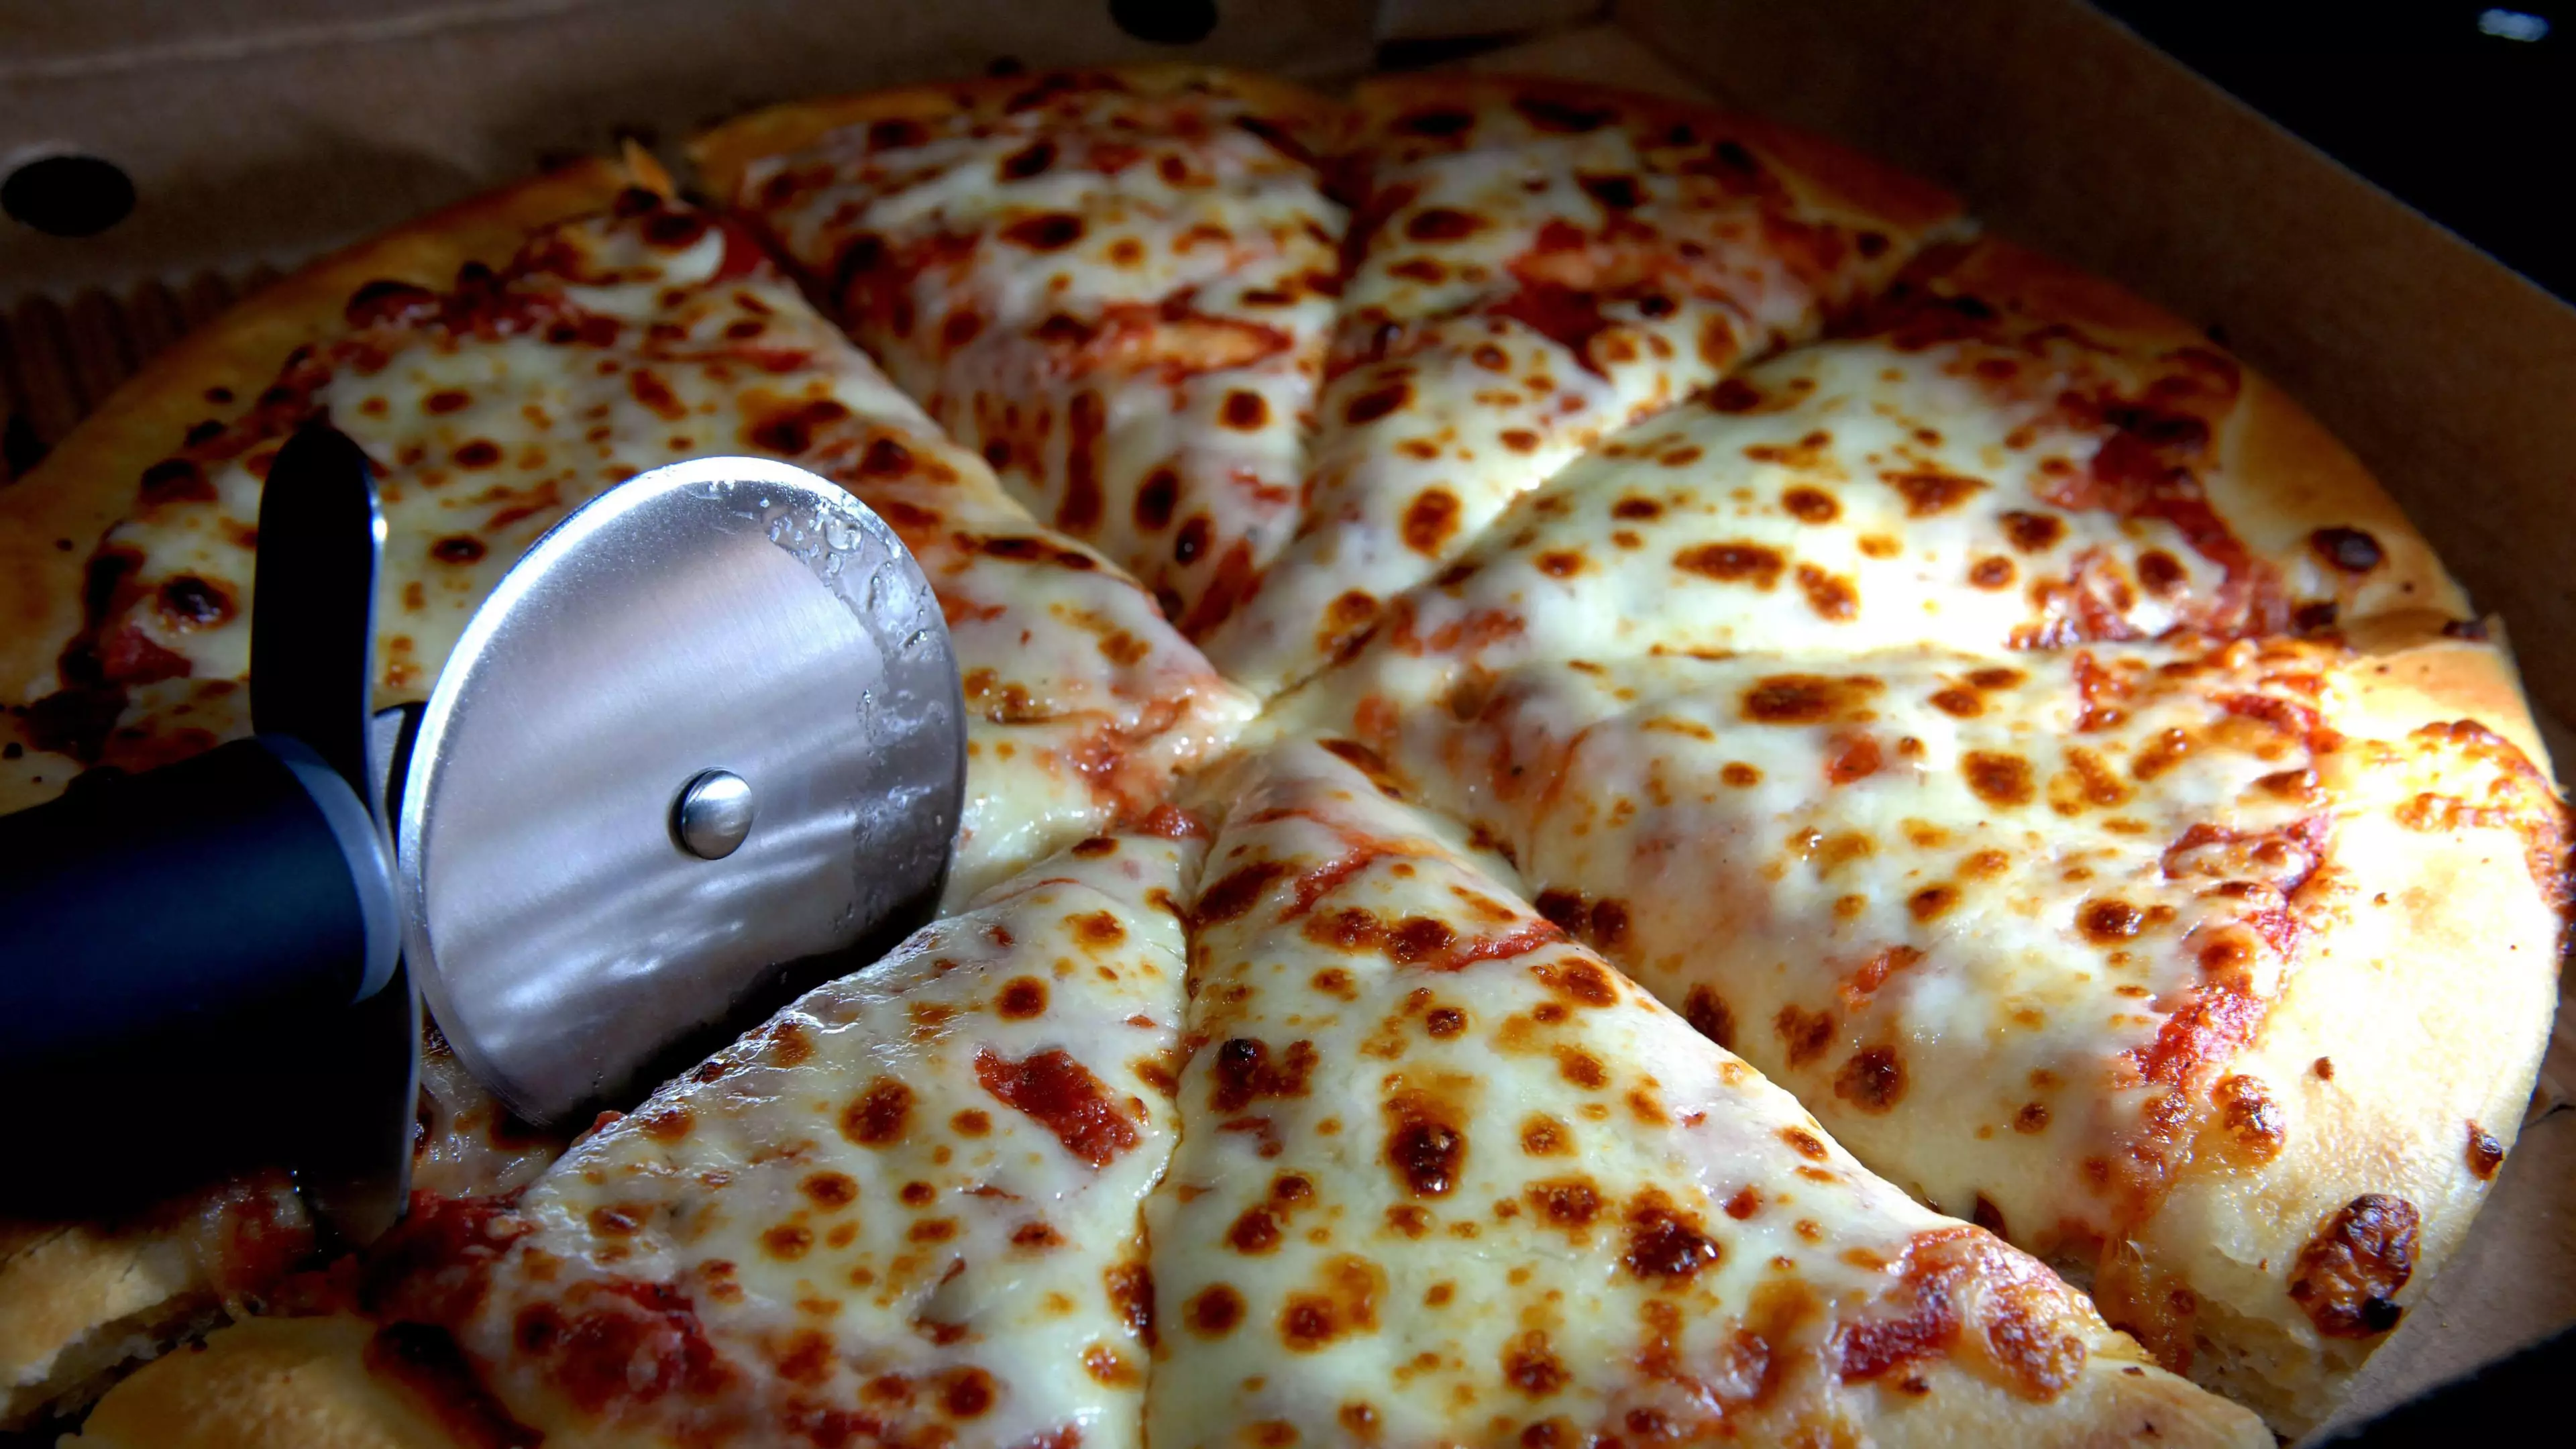 Man Used His Dead Neighbour's Debit Card To Buy £6K Worth Of Pizza